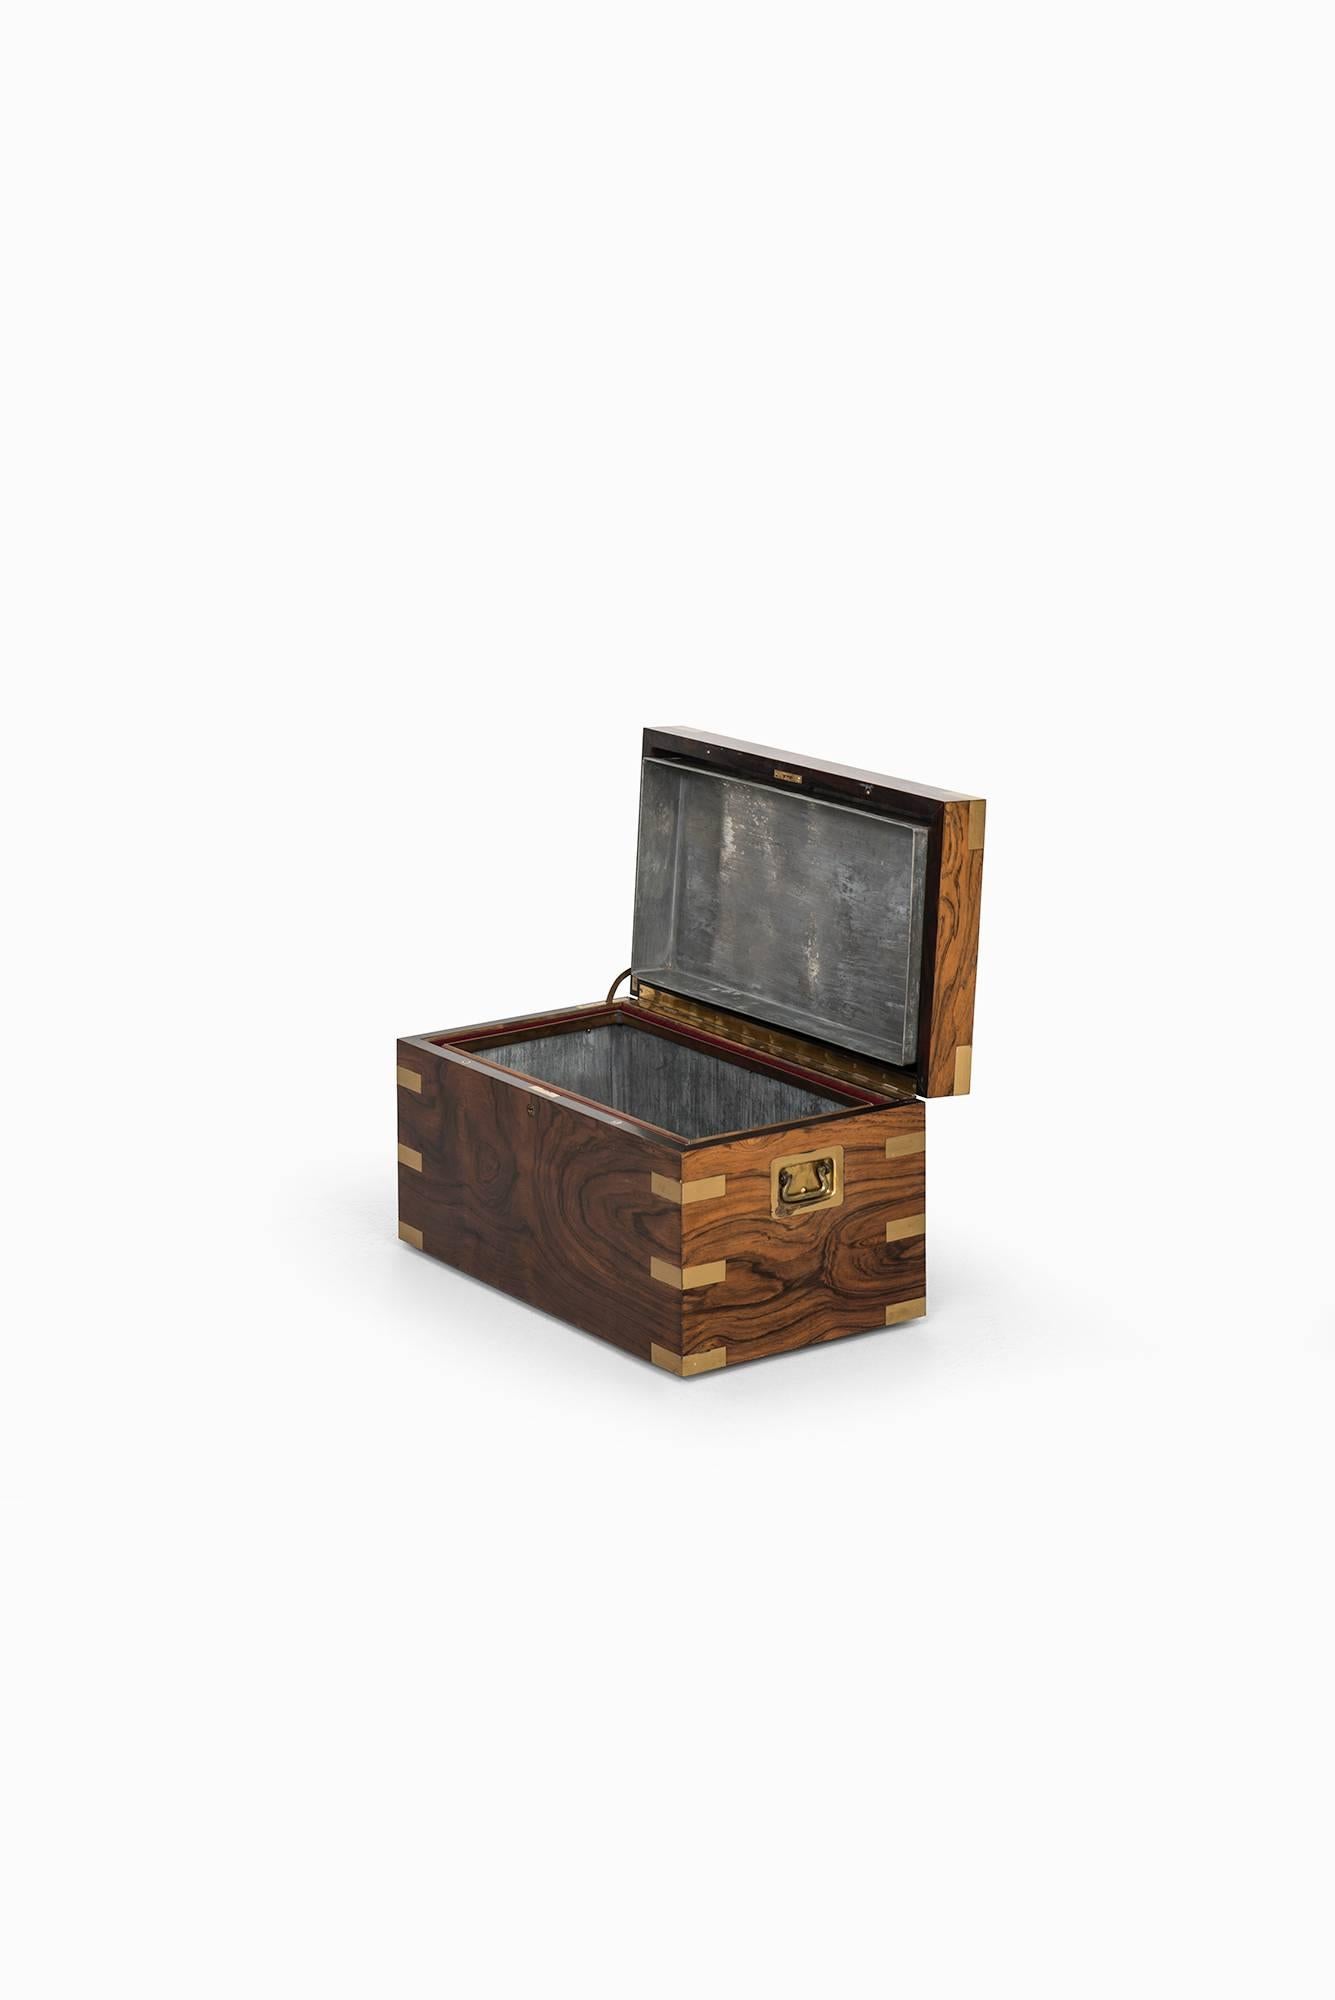 Rare big humidor or storage box. Produced in Denmark. In the manner of Ludvig Pontoppidan.